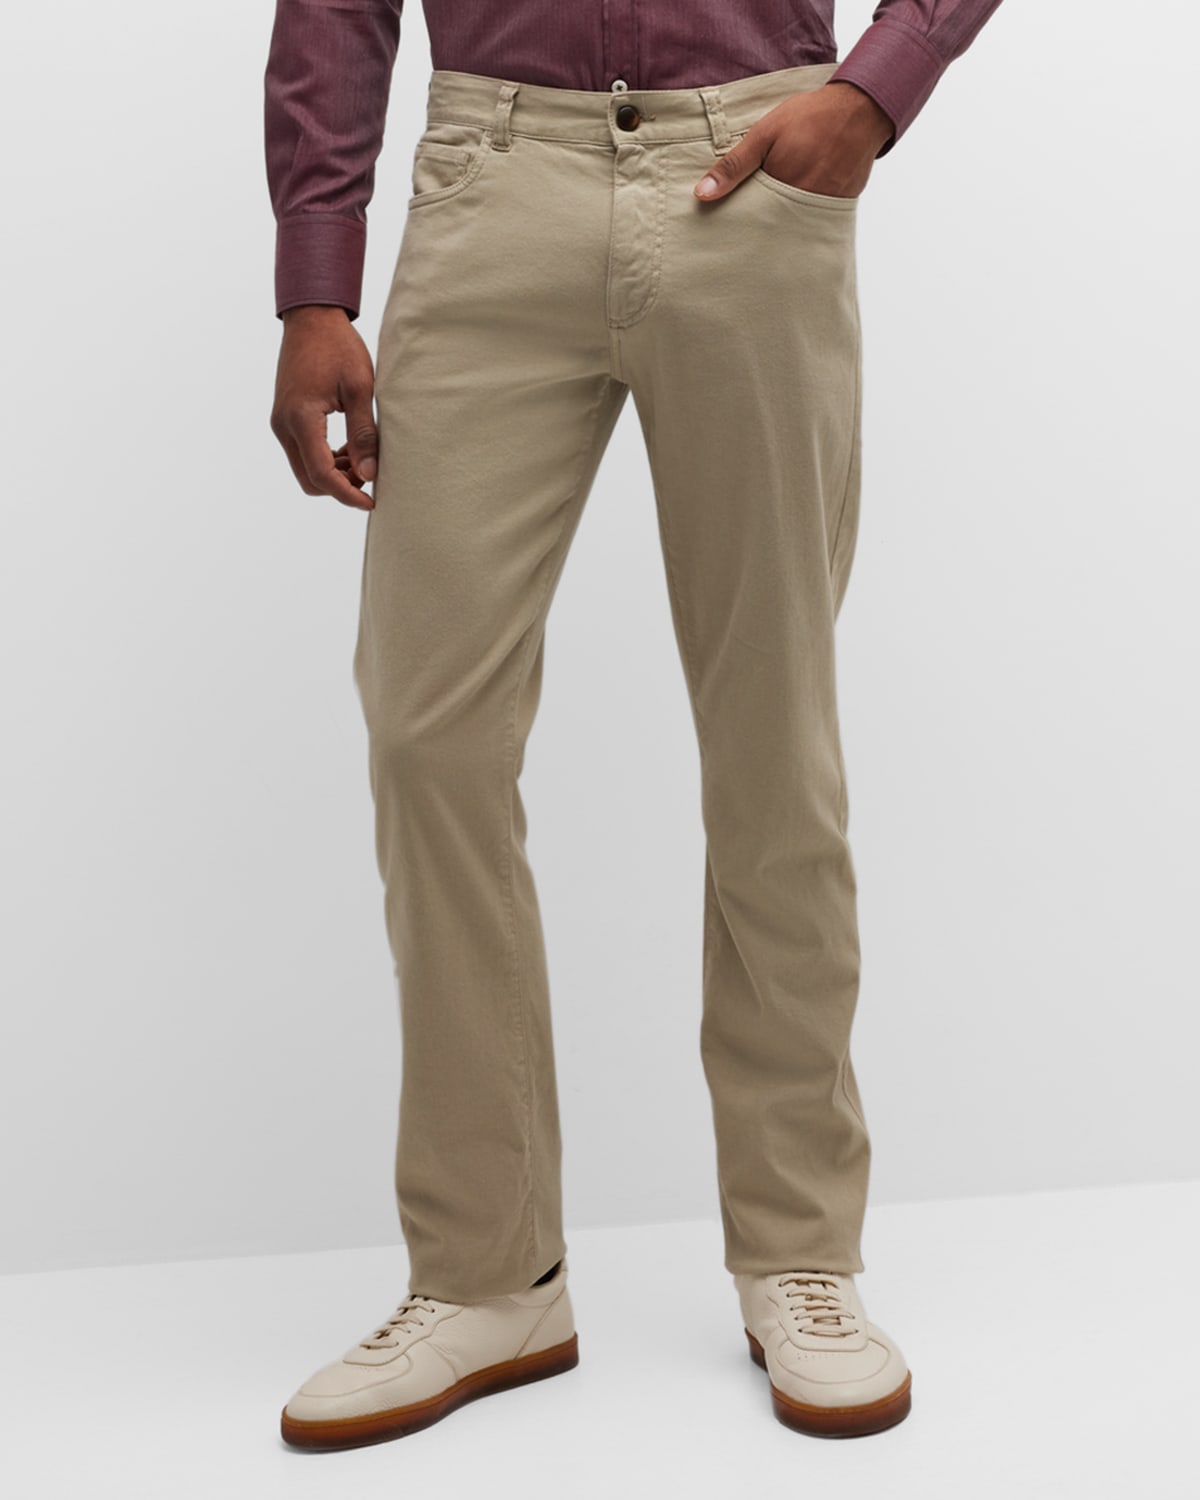 Canali Men's 5-pocket Stretch Trousers In Tan